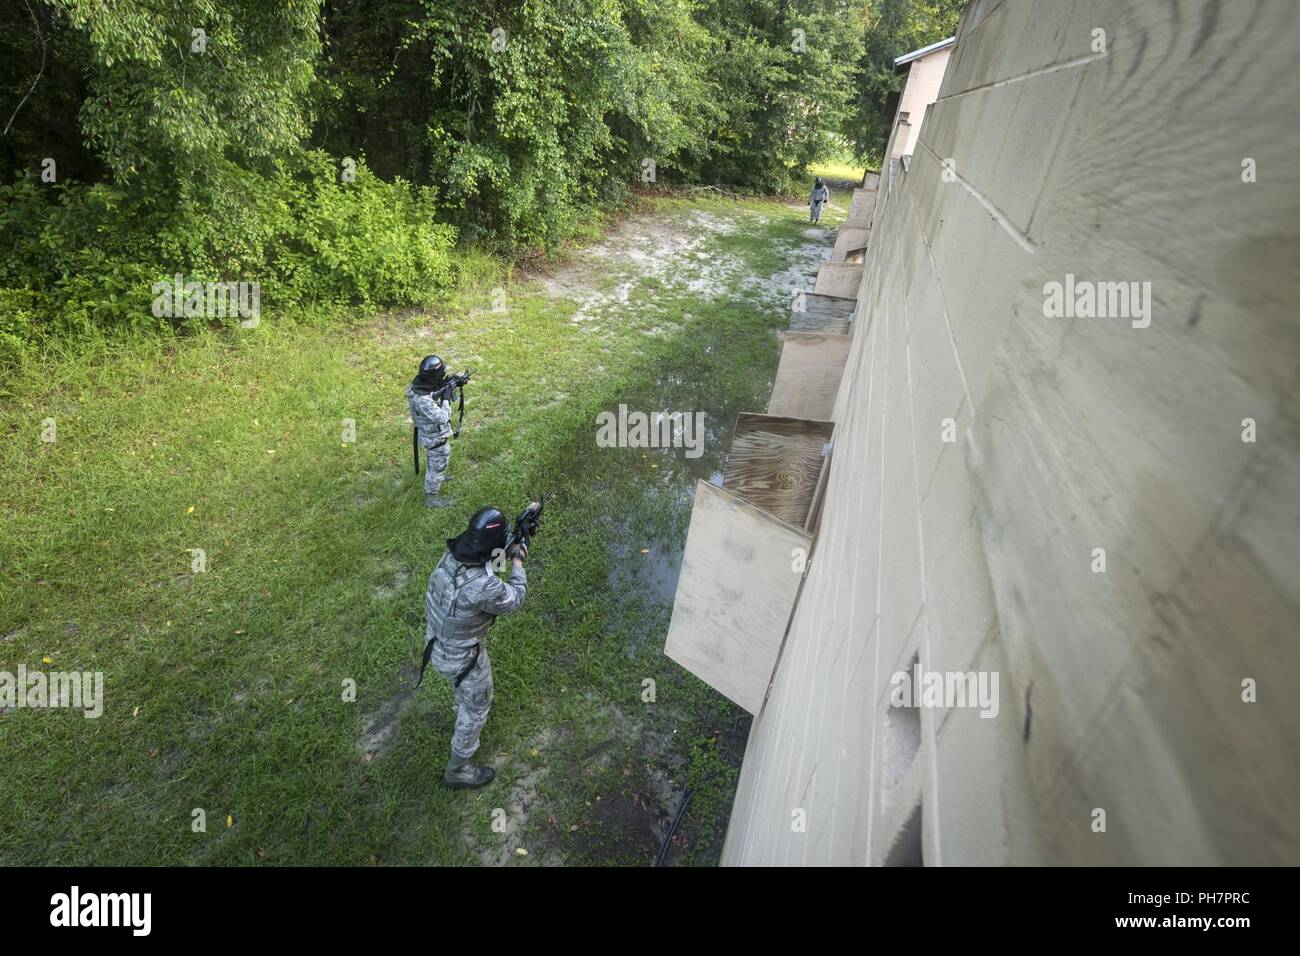 Airmen from the 23d Security Forces Squadron (SFS) take aim at an opposing assailant during a Force on Force training scenario, June 29, 2018, at Moody Air Force Base, Ga. This training was held to ensure SFS Airmen are proficient in various tactics and procedures such as: building clear out, team movements, hostage rescue and properly applying cover fire. The scenario required Airmen to maneuver through multiple buildings to rescue a simulated victim guarded by opposing forces. Stock Photo